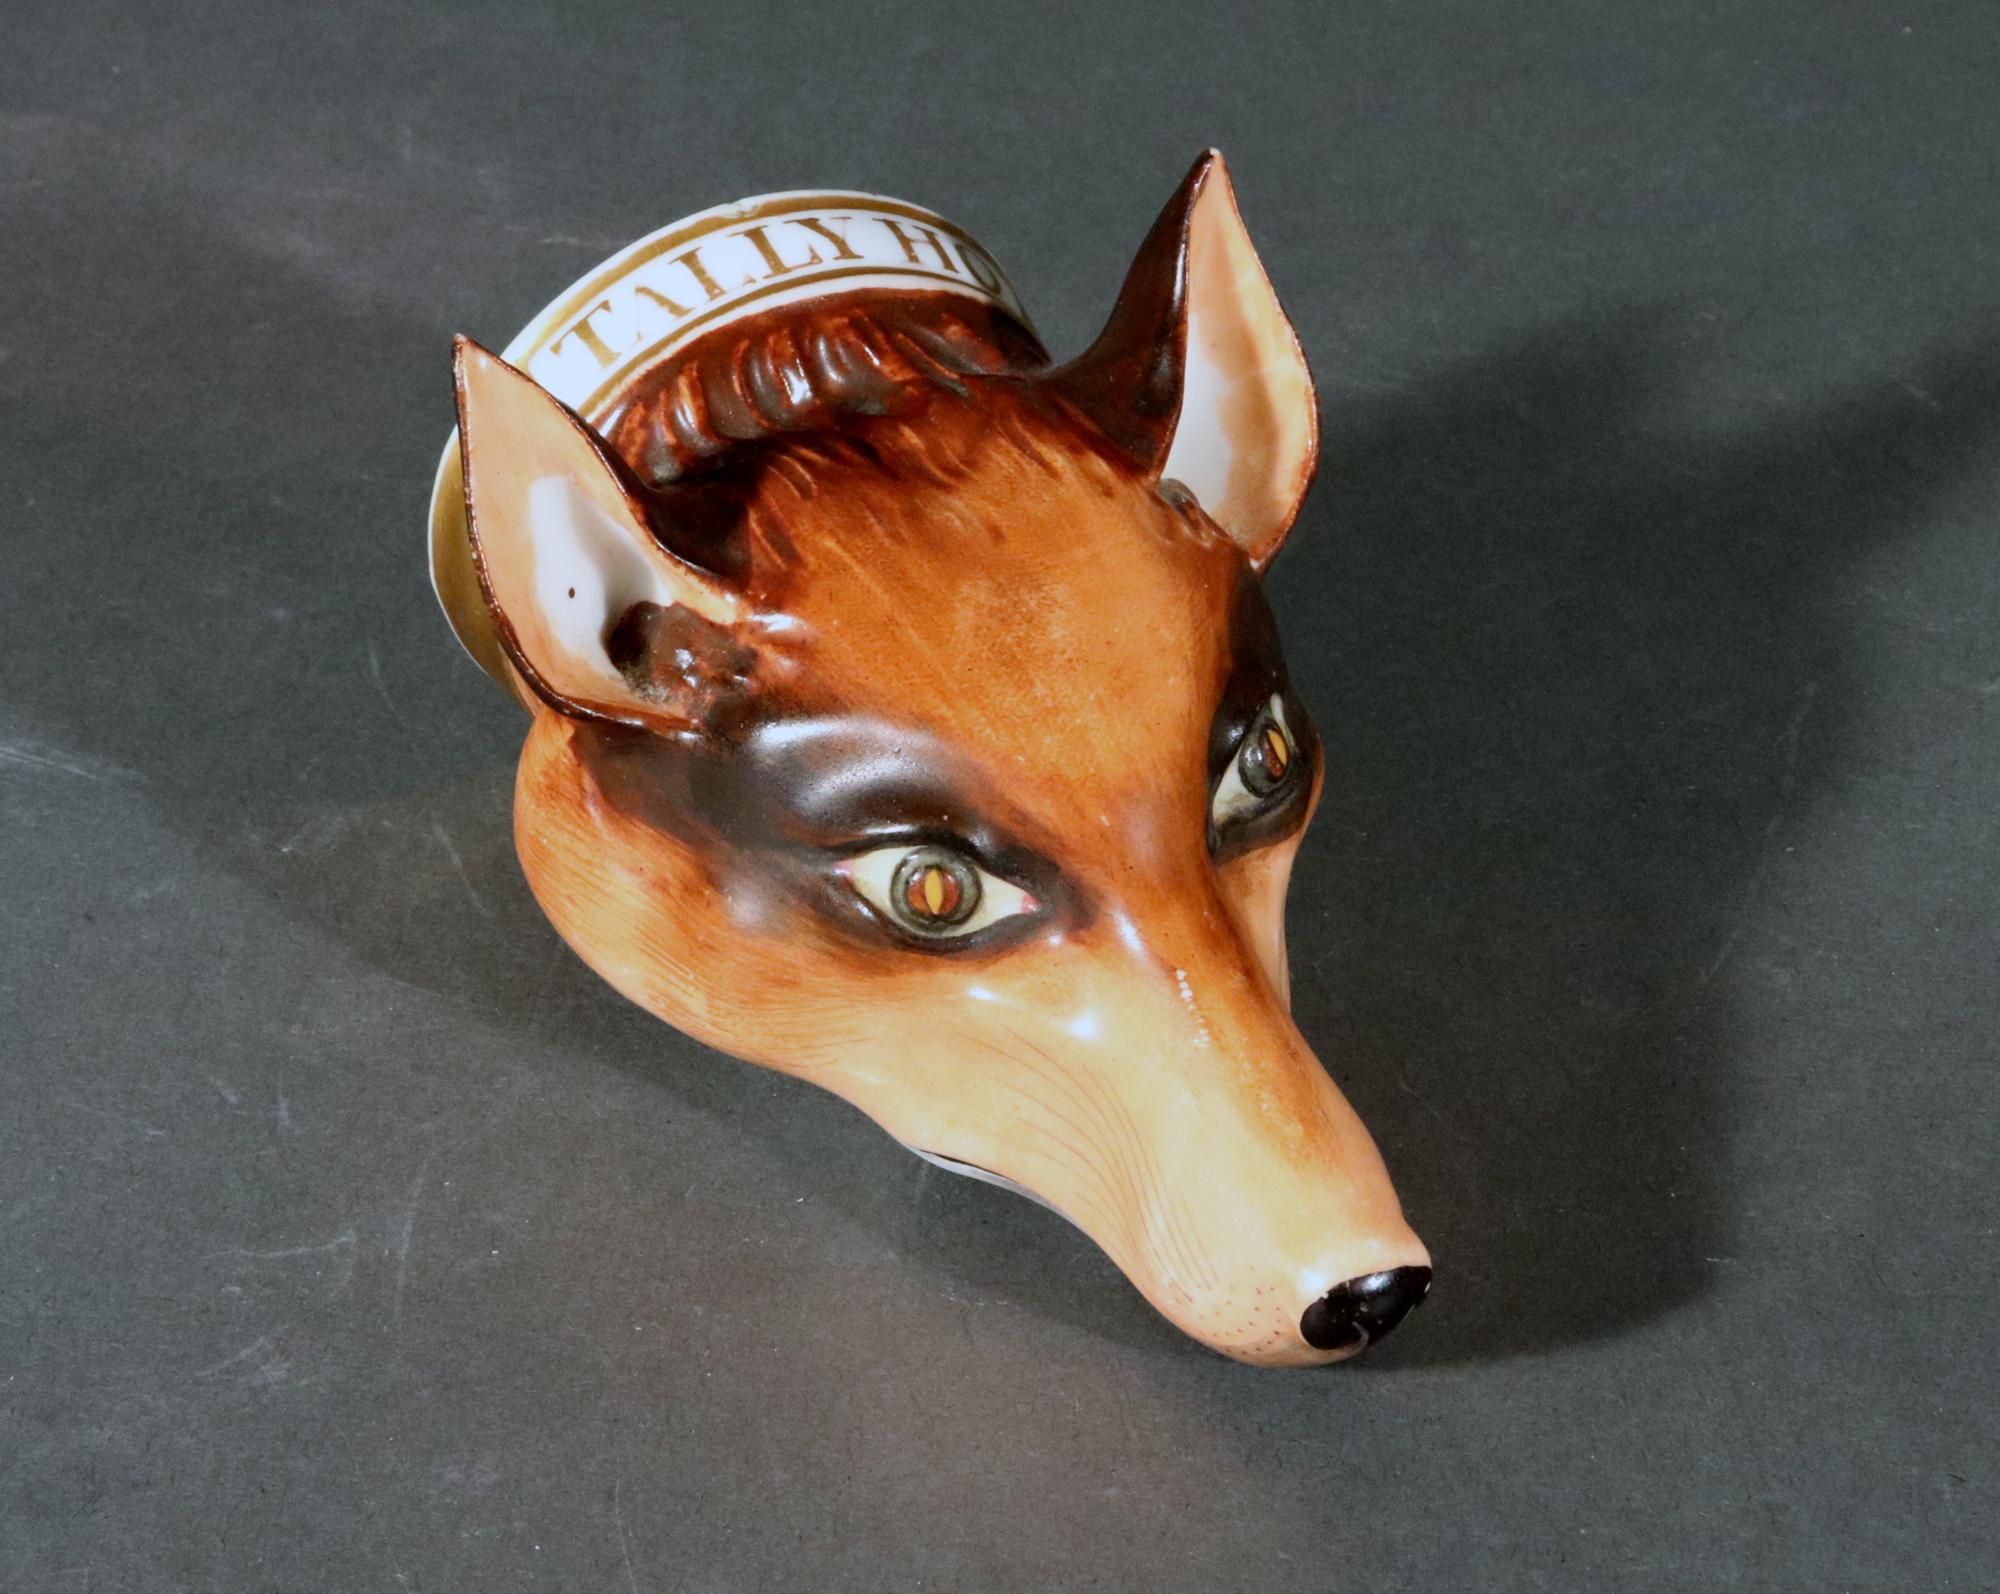 English Porcelain Fox-head Stirrup Cup,
Possibly Derby, Bloor or Stevenson & Hancock,
Circa 1820

The small, finely modeled stirrup Cup is in the form of a fox head with a gold collar with 